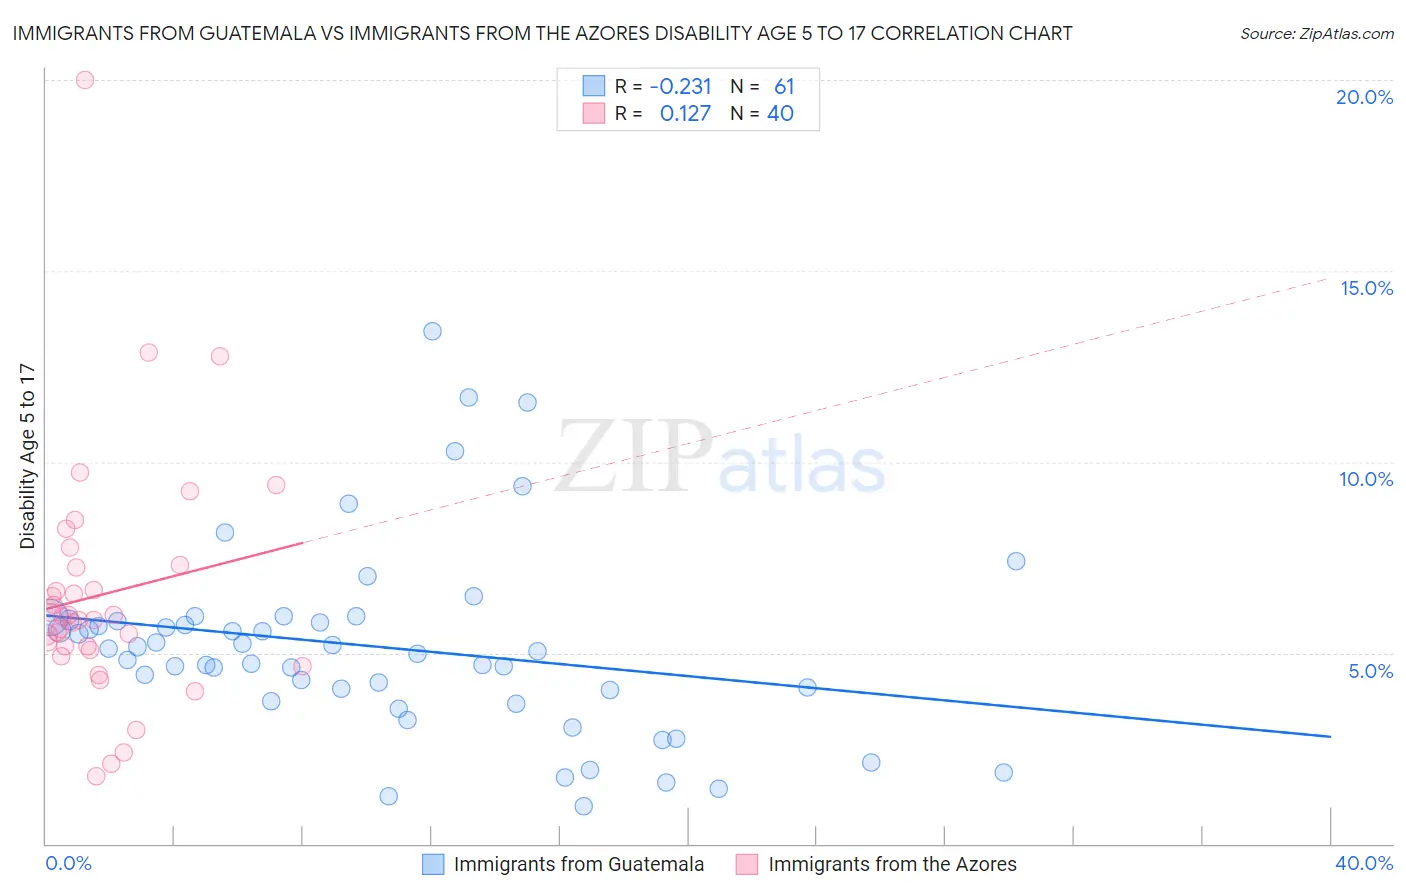 Immigrants from Guatemala vs Immigrants from the Azores Disability Age 5 to 17